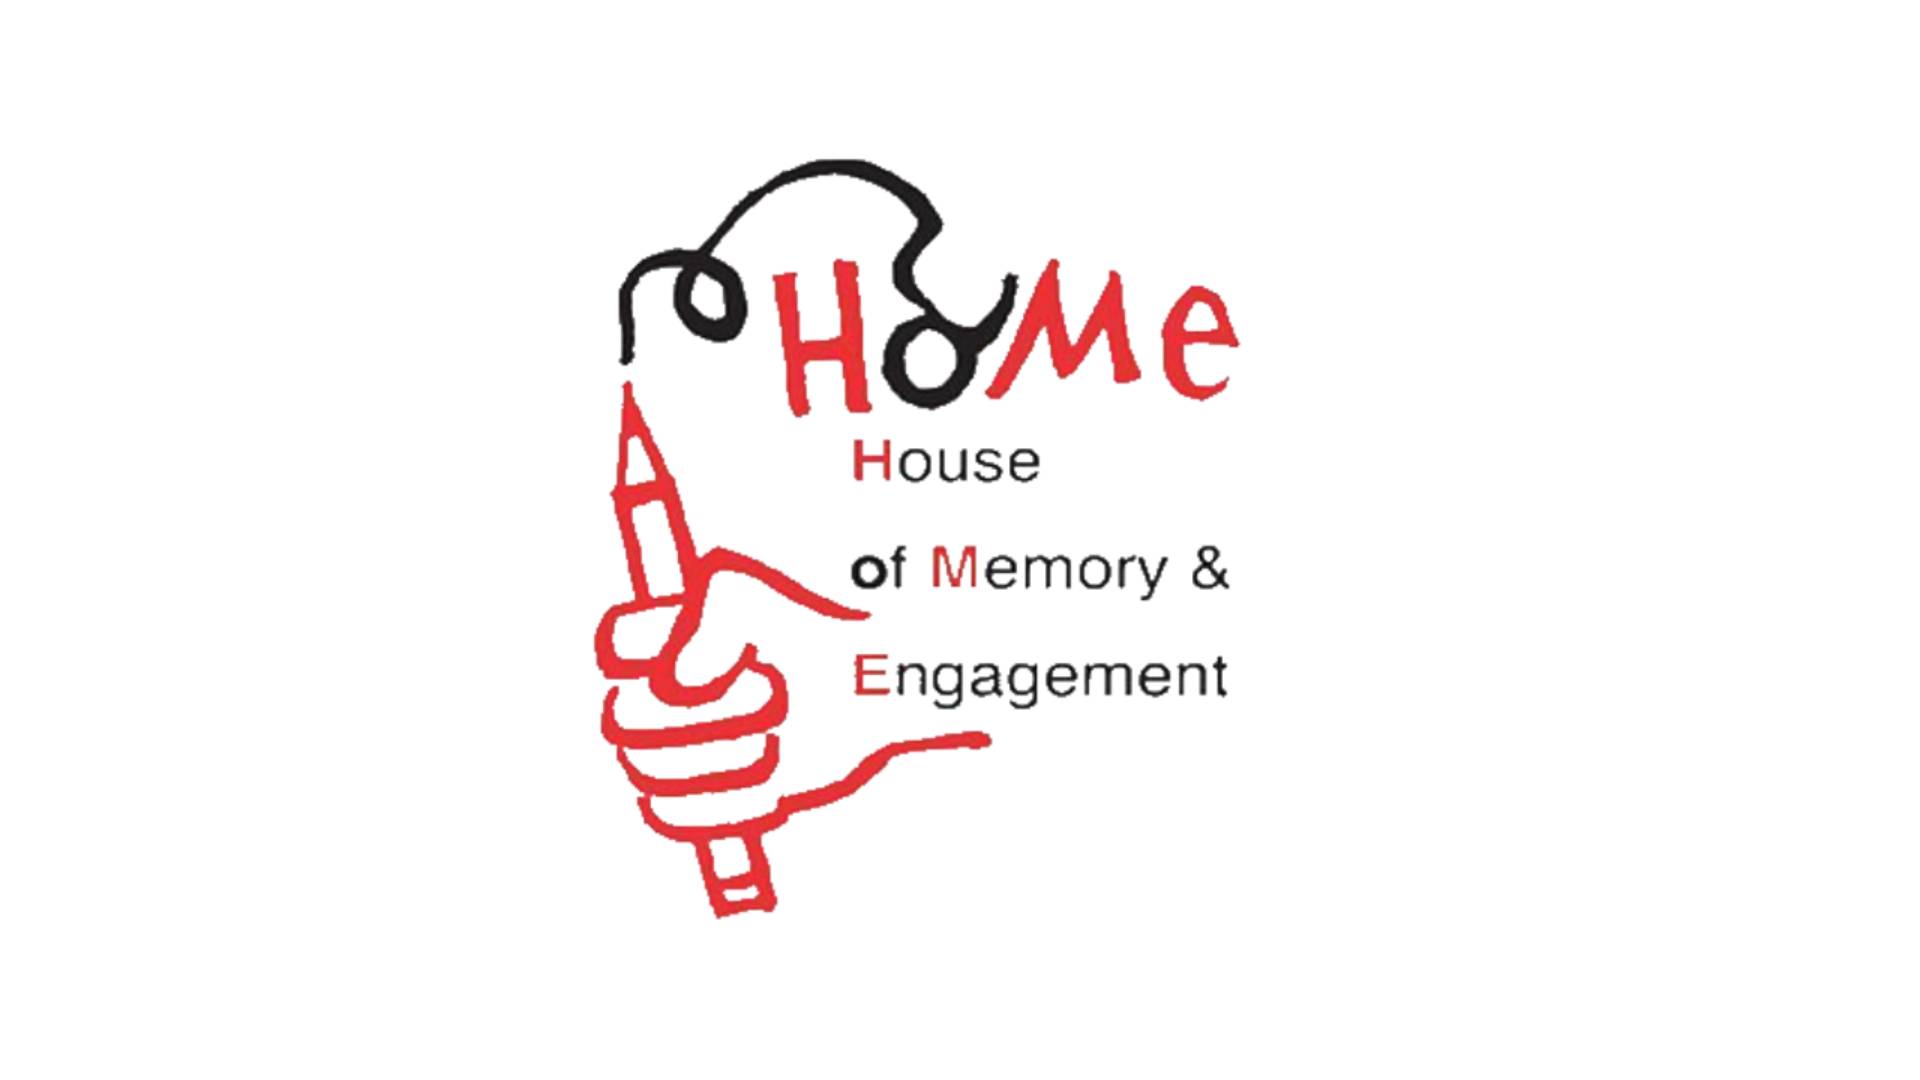 HOME – House of Memory & Engagement